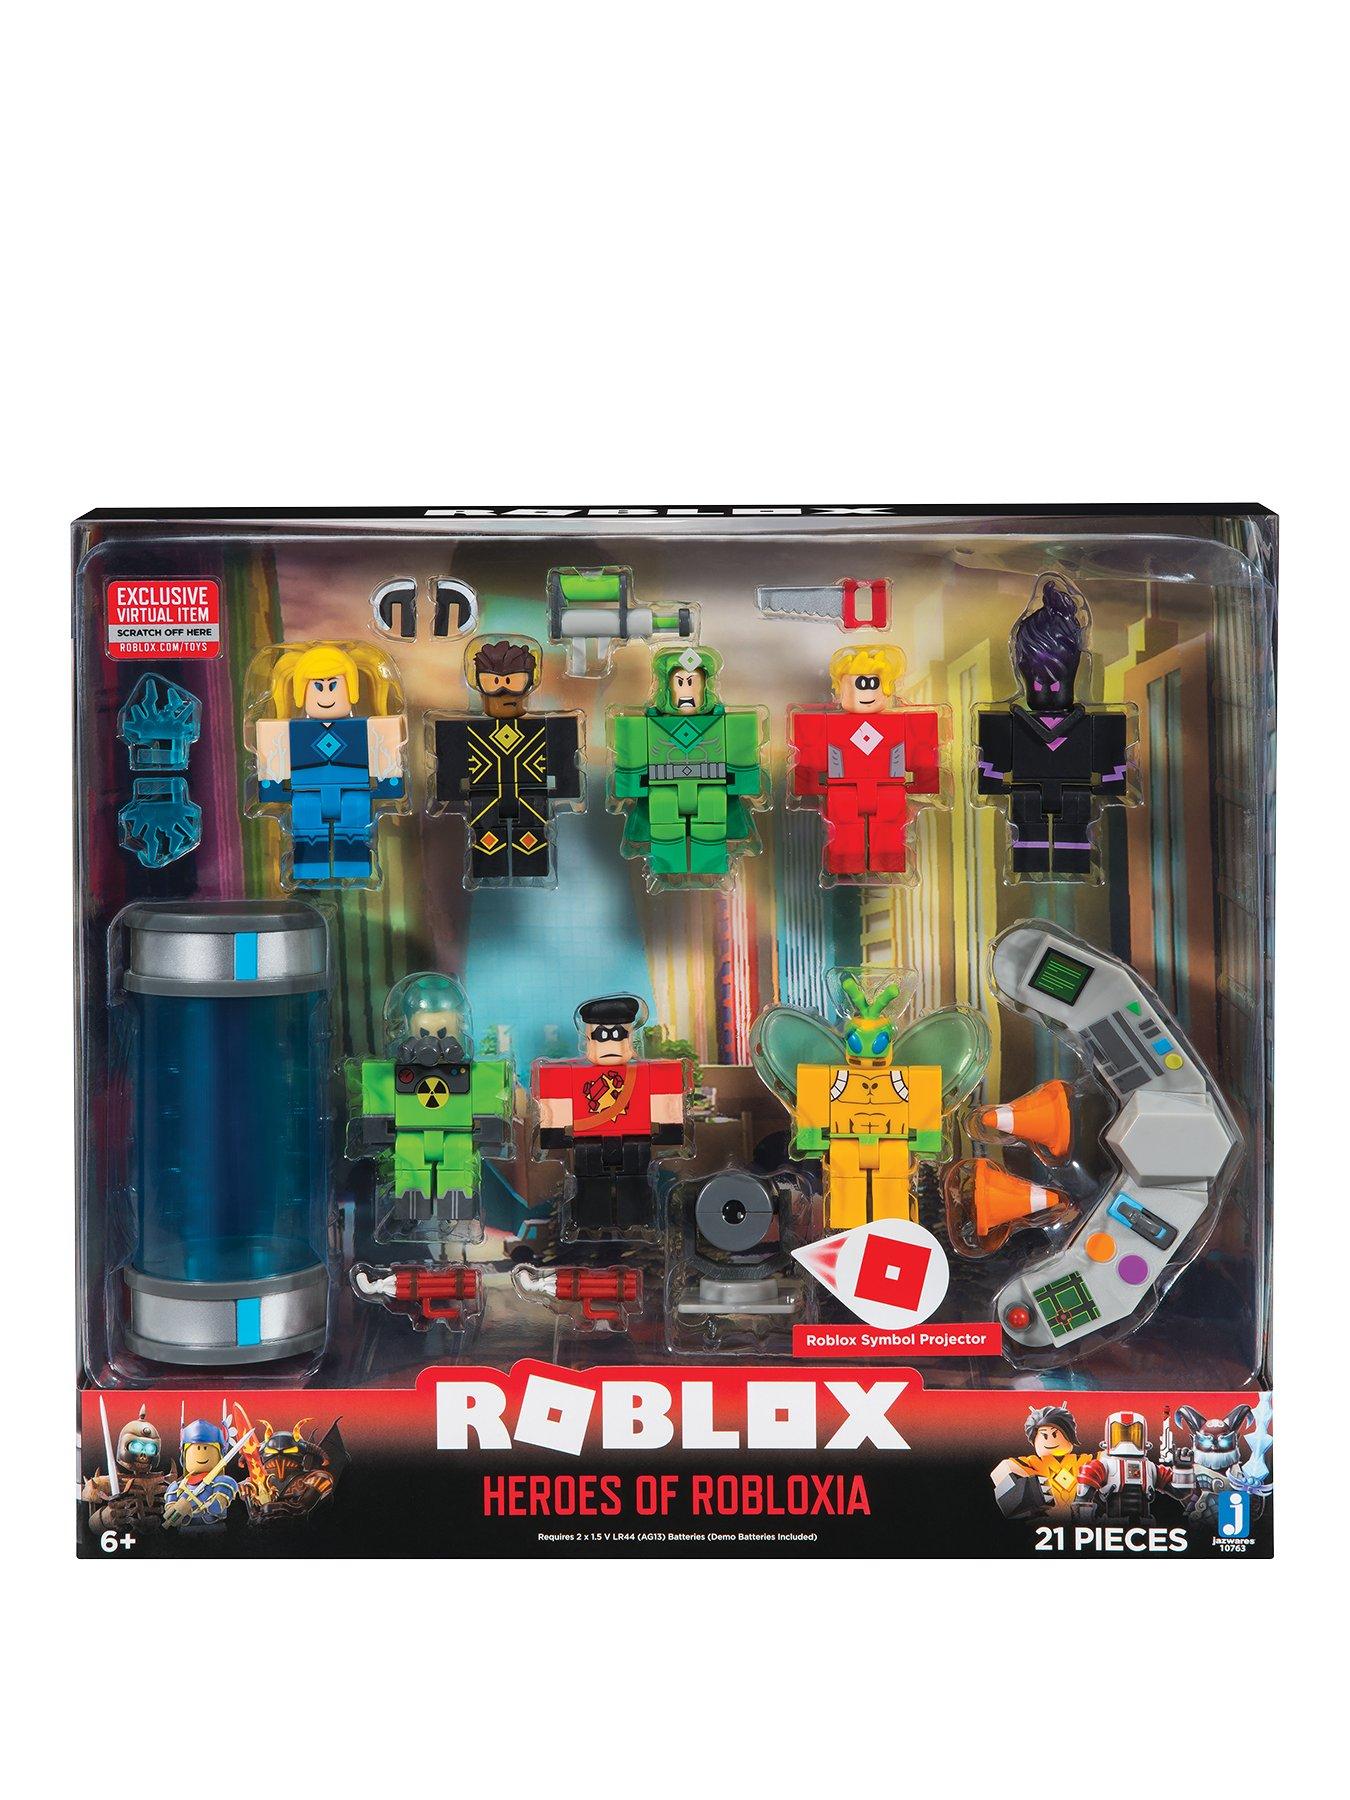 Roblox Heroes Of Robloxia Playset Very Co Uk - https www roblox com request error code 404 roblox